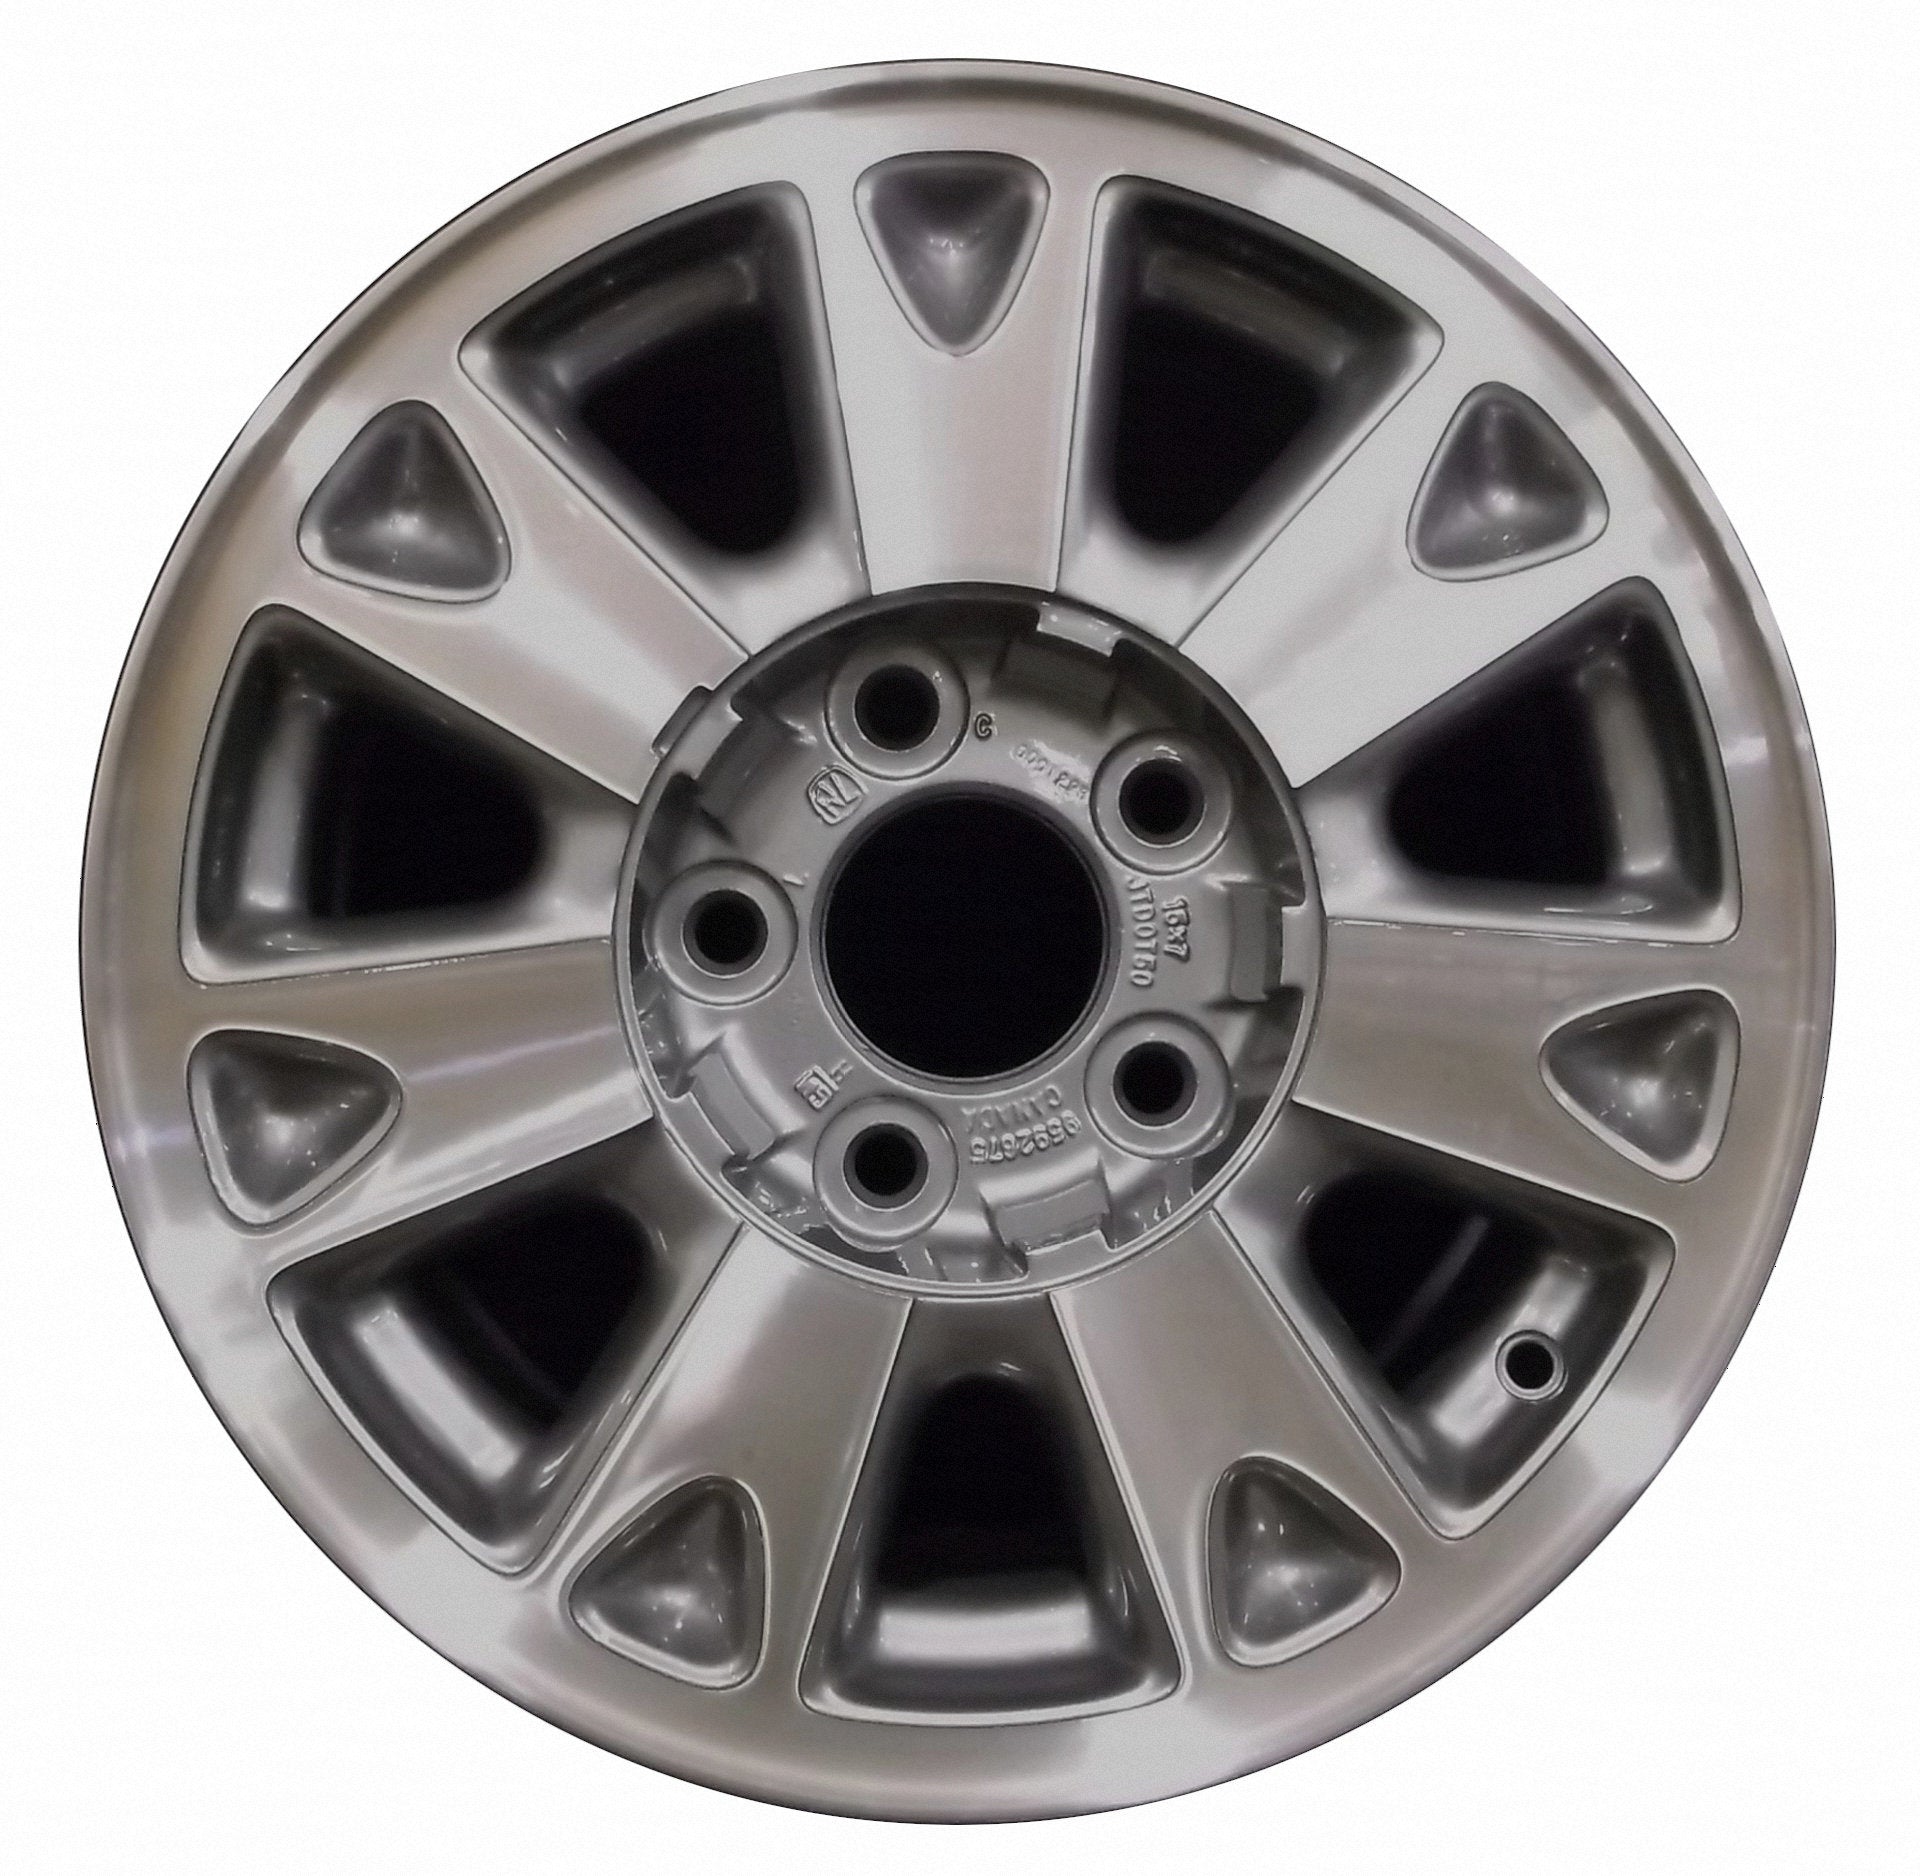 Chevrolet S10 Truck  1998, 1999, 2000, 2001, 2002, 2003, 2004 Factory OEM Car Wheel Size 15x7 Alloy WAO.5064.LC09.MA